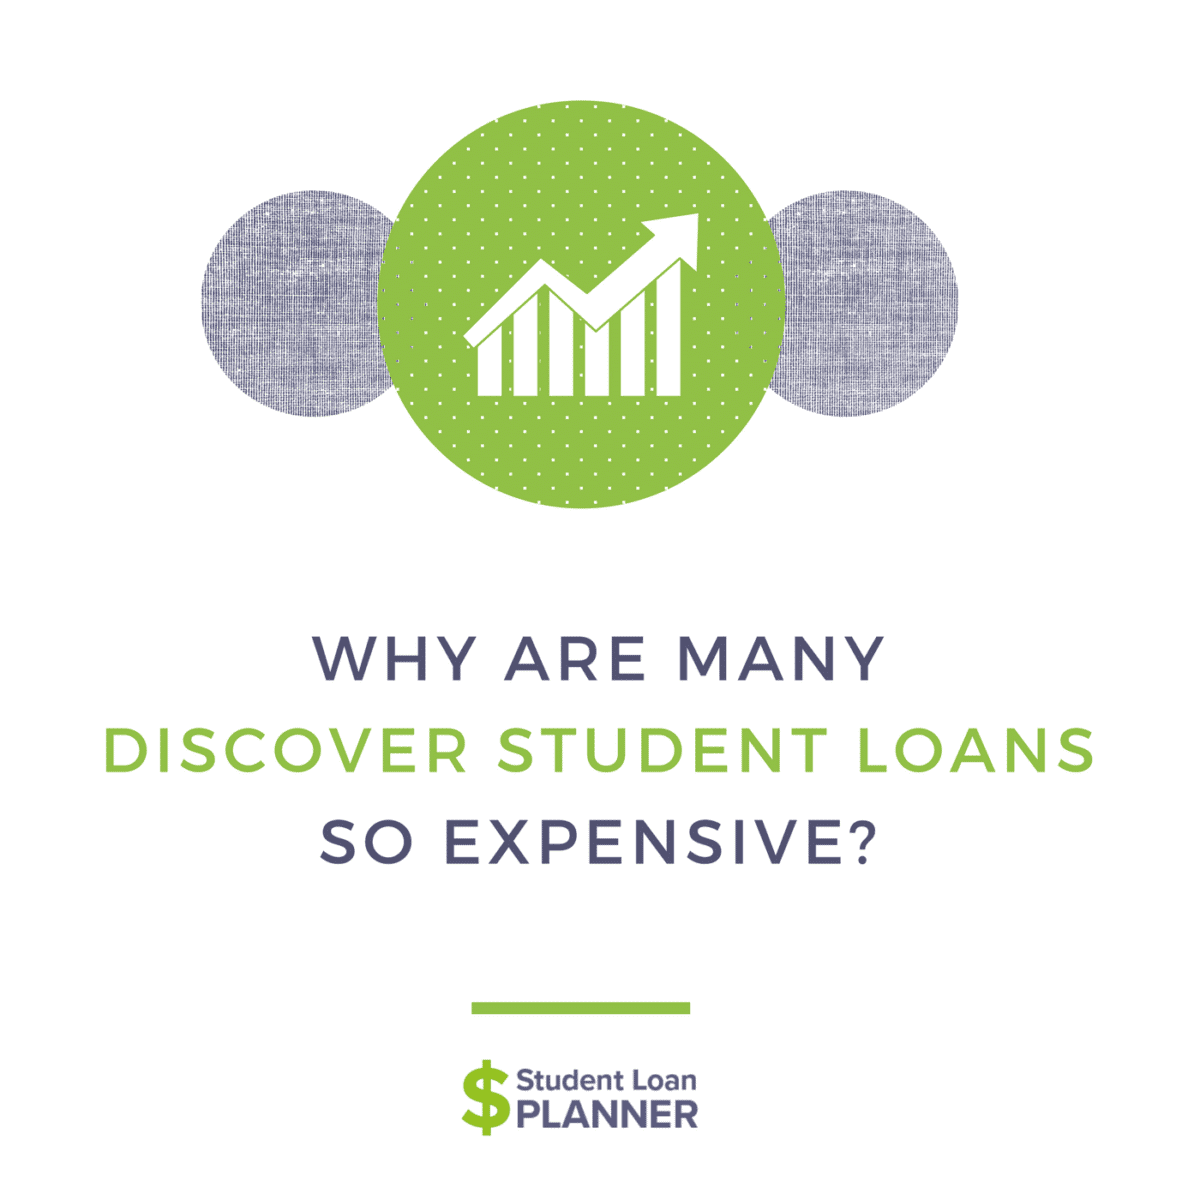 Discover Student Loans Cost Way Too Much Student Loan Planner